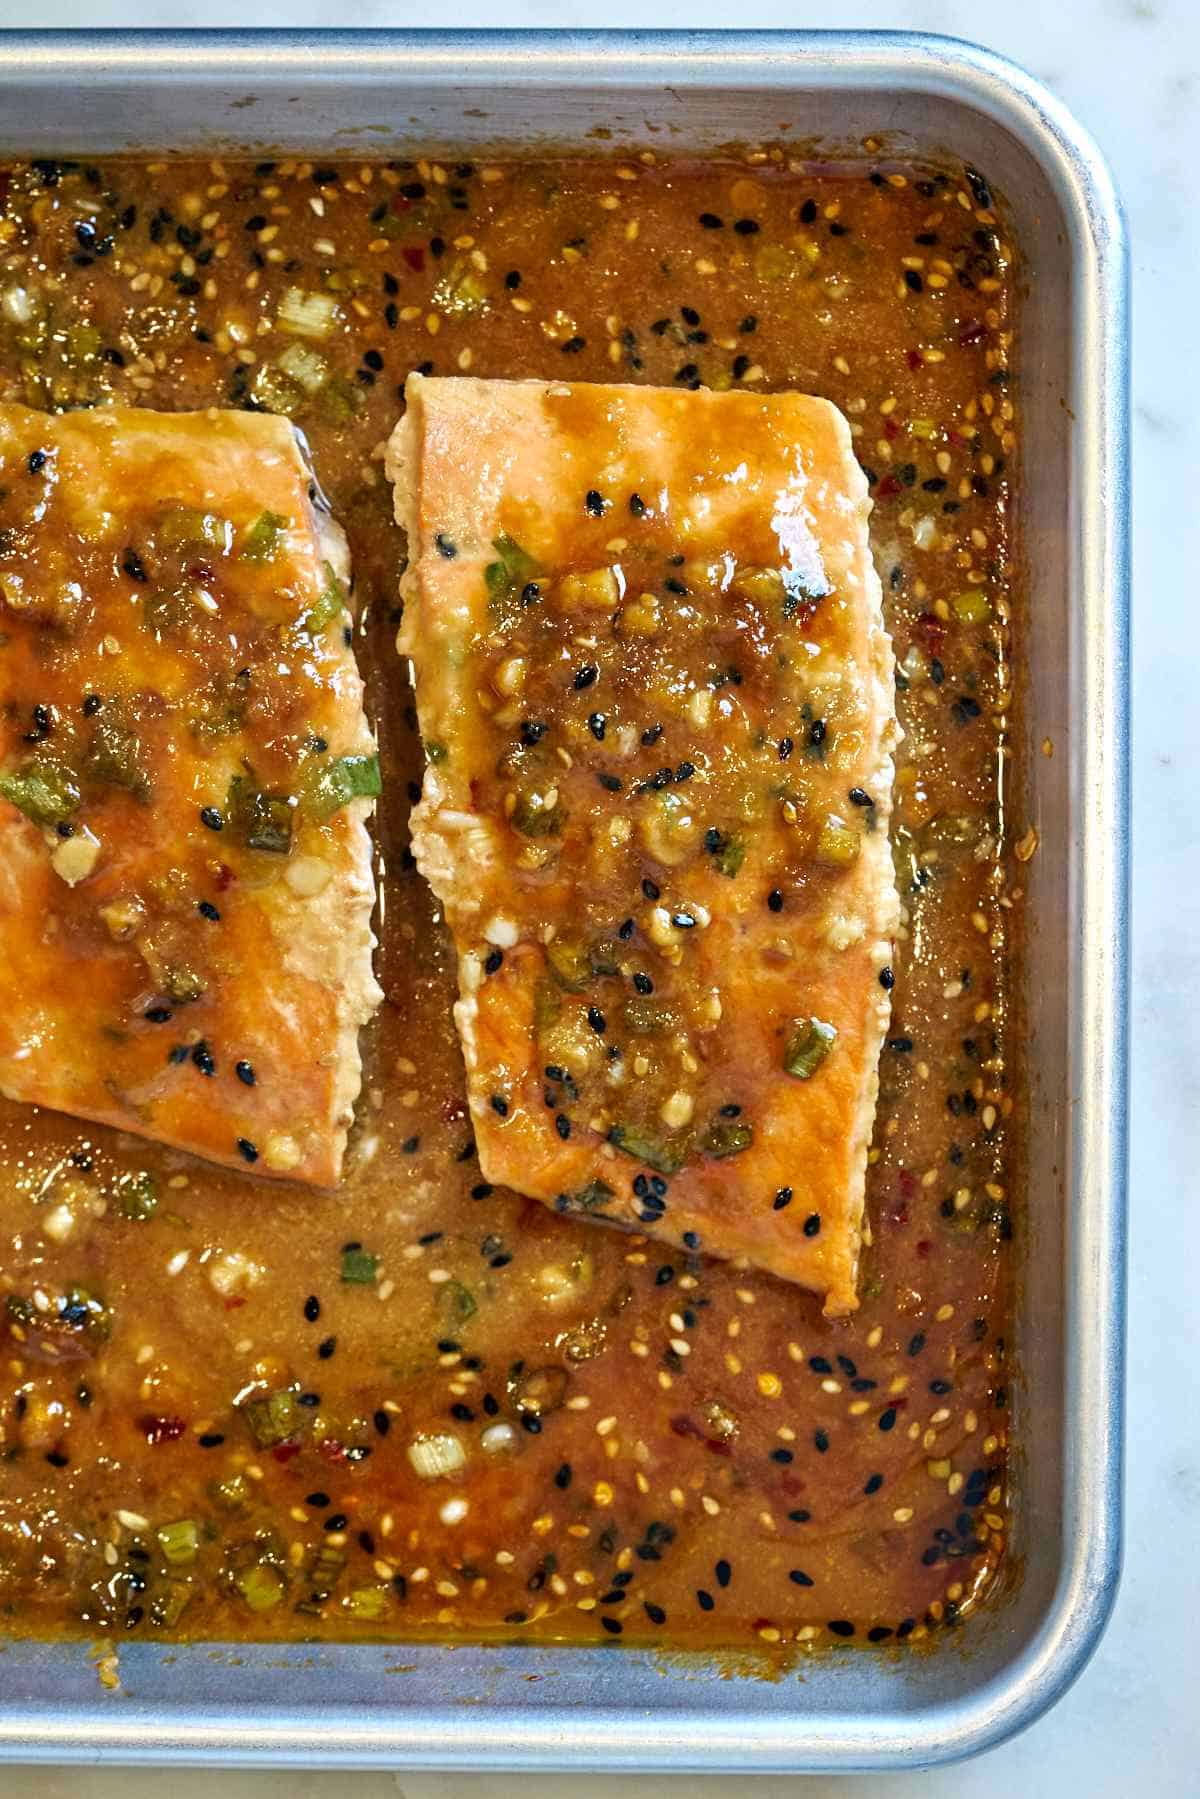 Cooked salmon on a baking sheet.